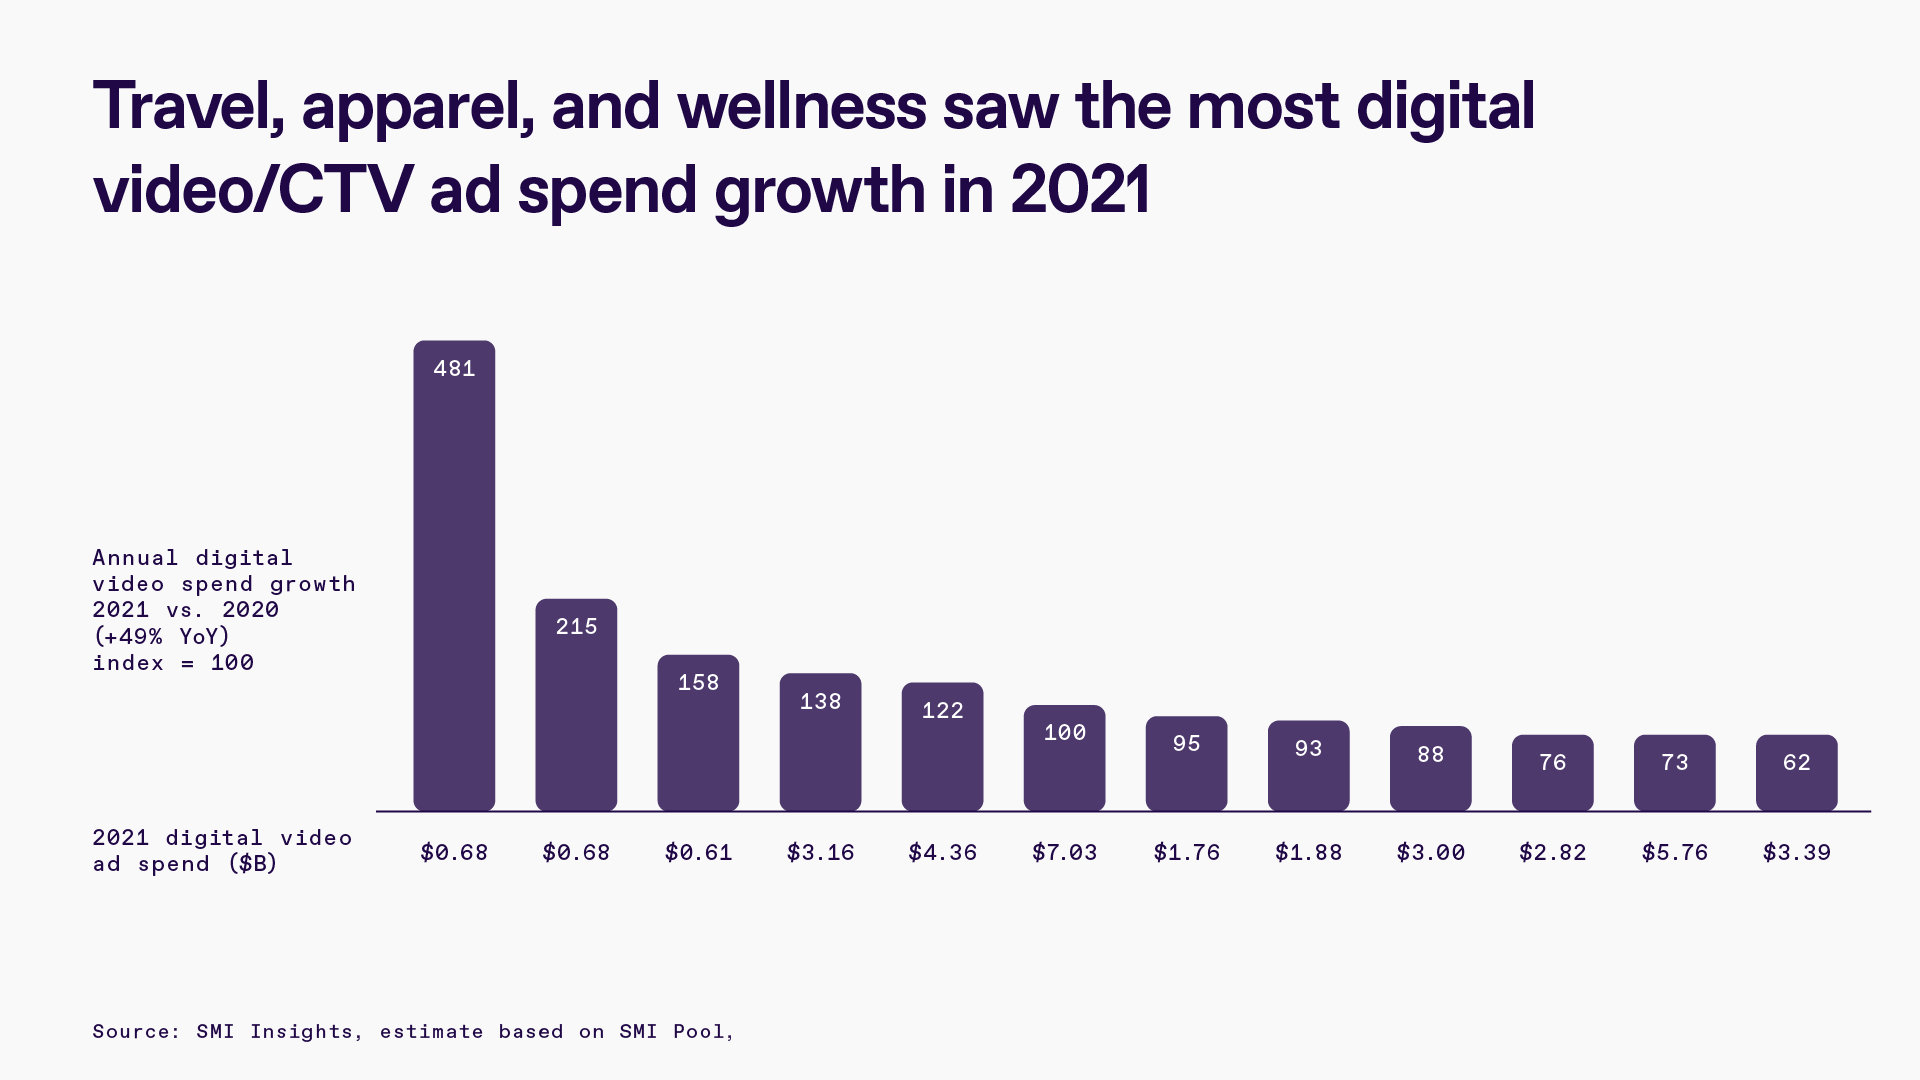 Chart showing travel, appaerl and wellness saw the most digital video/CTV ad spend growth in 2021